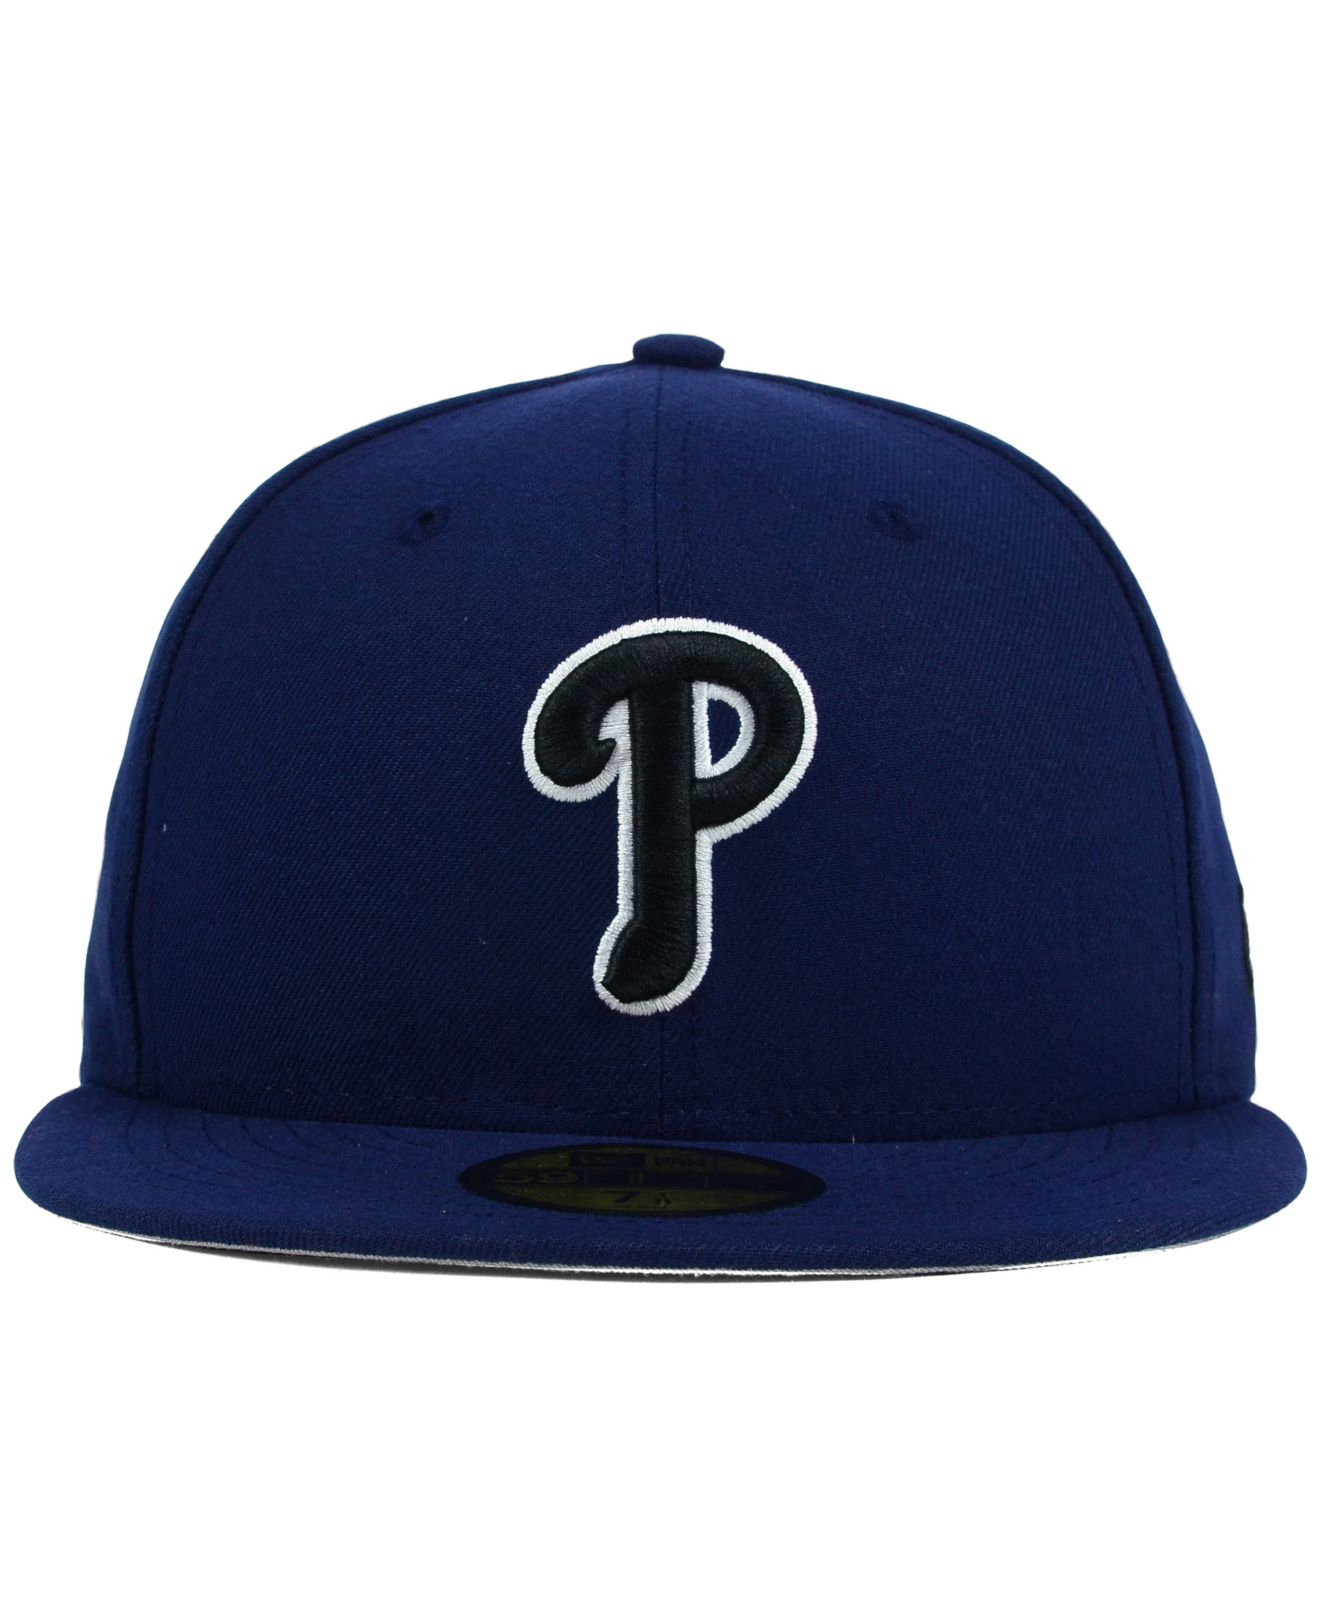 New EraNew Era Casquette 59Fifty Phillies Low Fitted Marque  